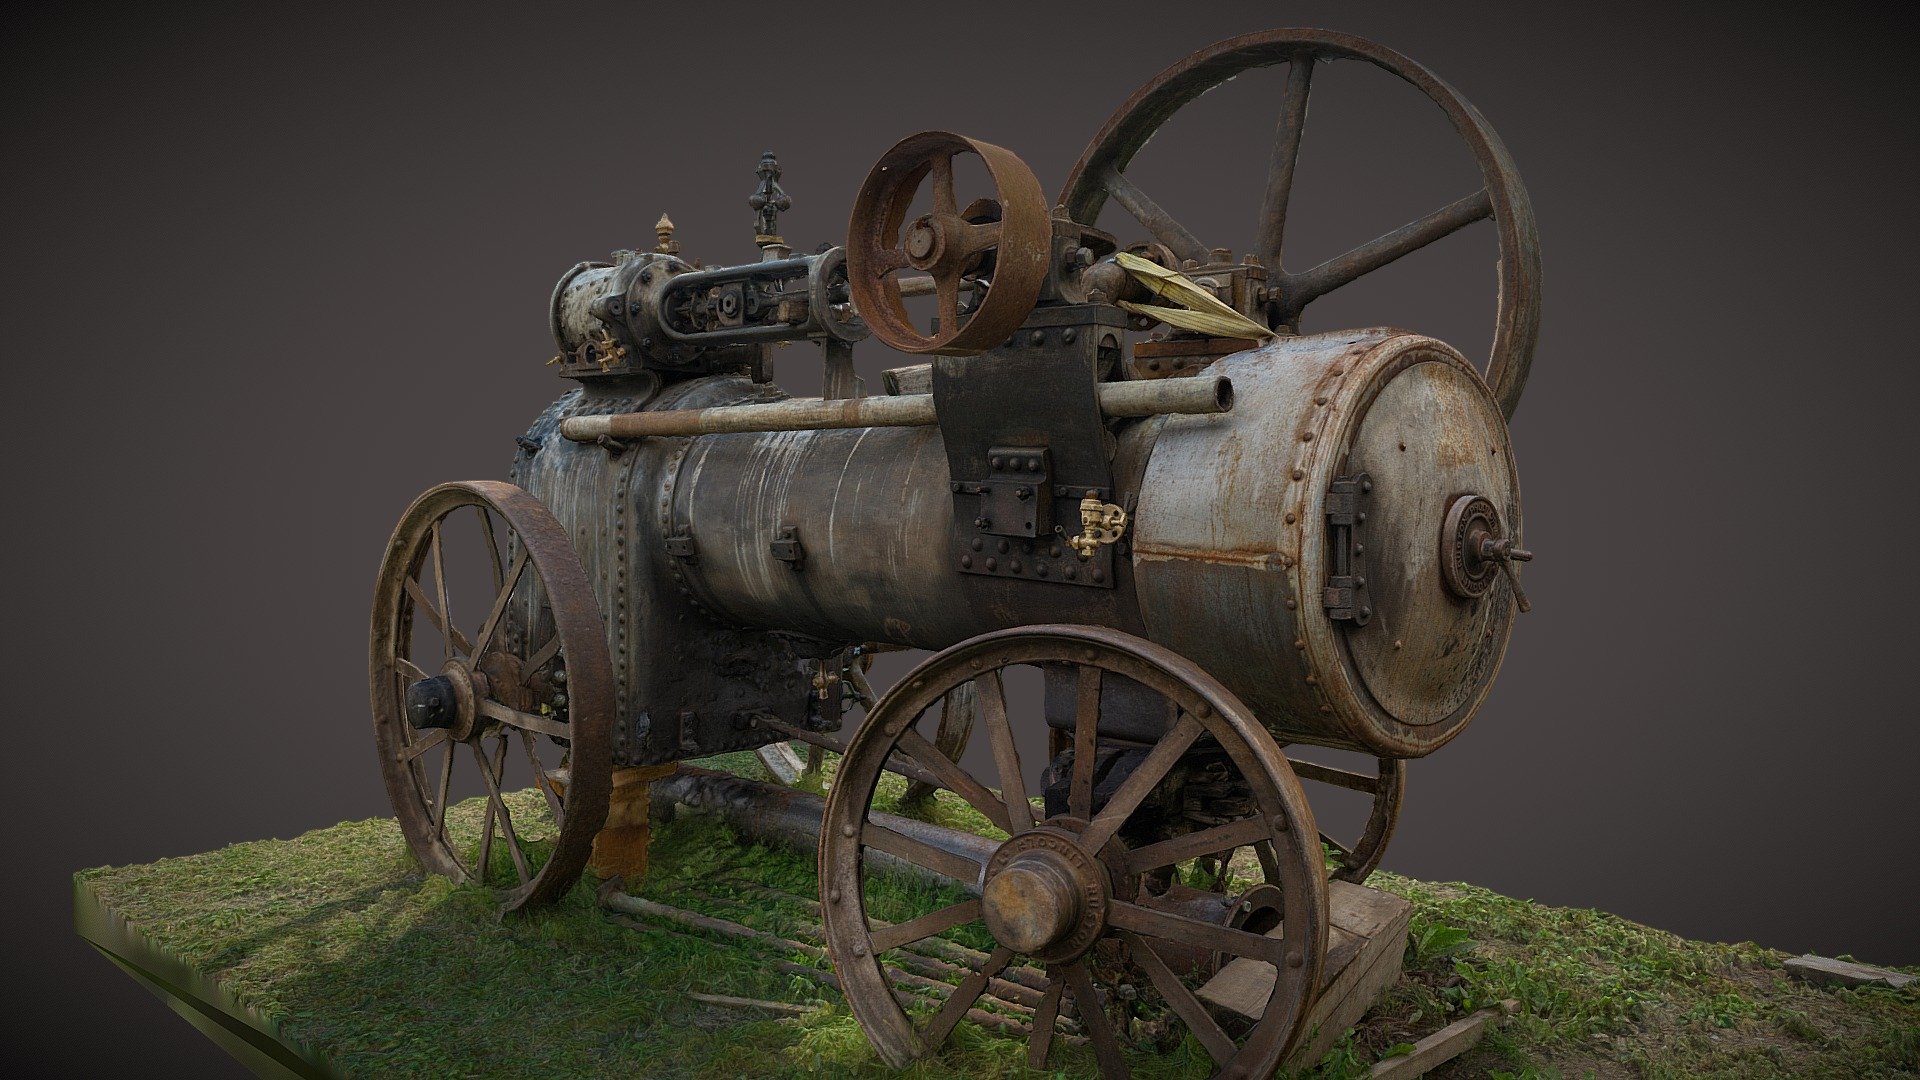 Old giant steam engine.

Photogrammetry capture created in RealityCapture from 326 images.

© Saulius Zaura www.dronepartner.lt 2022 - Old giant steam engine - 3D model by Saulius.Zaura 3d model